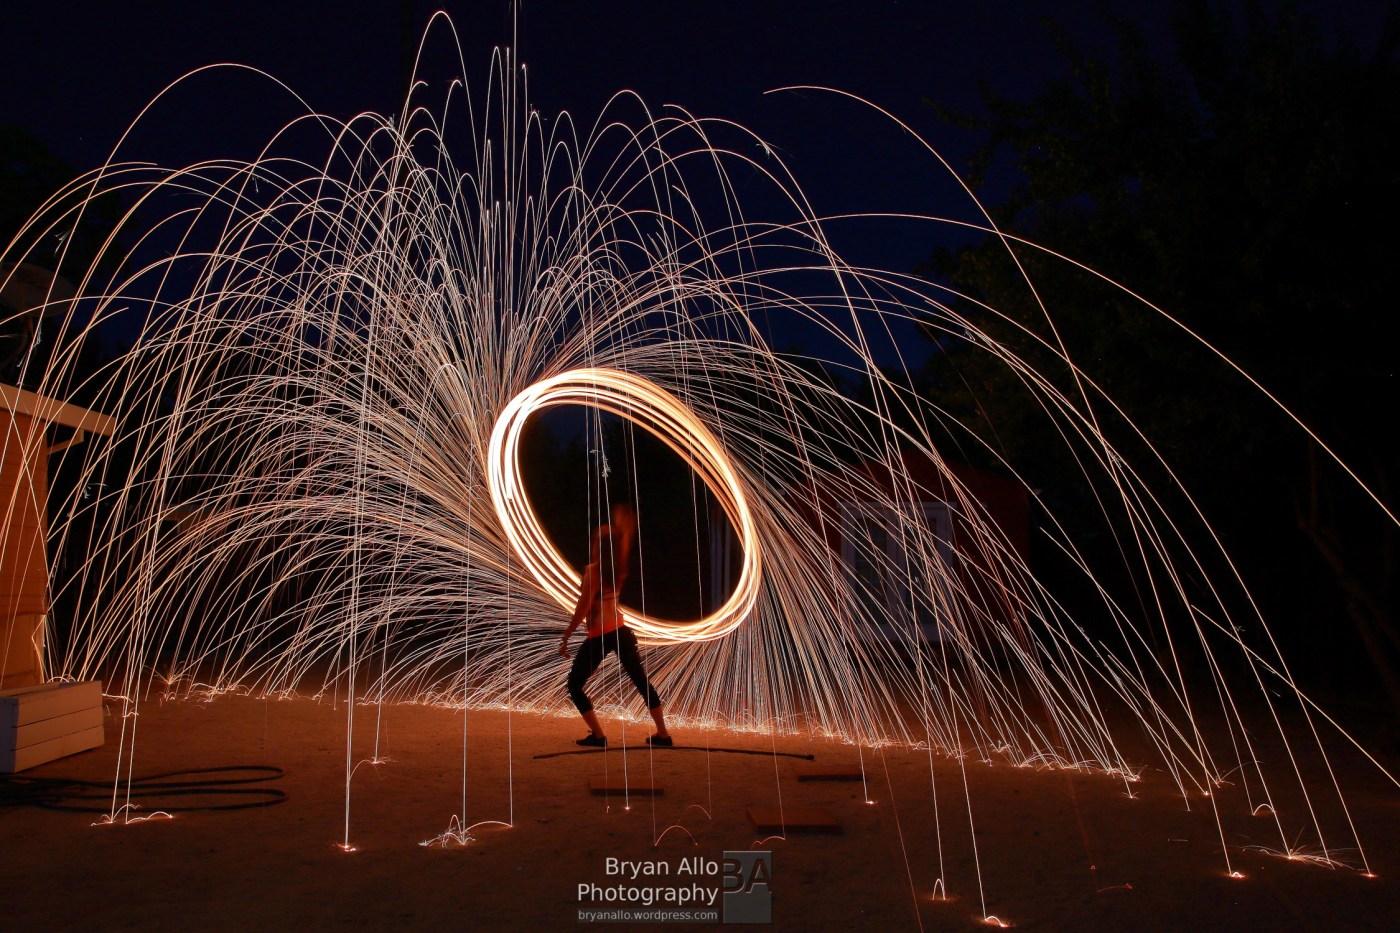 Light Painting with Light Tubes and Burning Steel Wool - GlobalPhotoClub